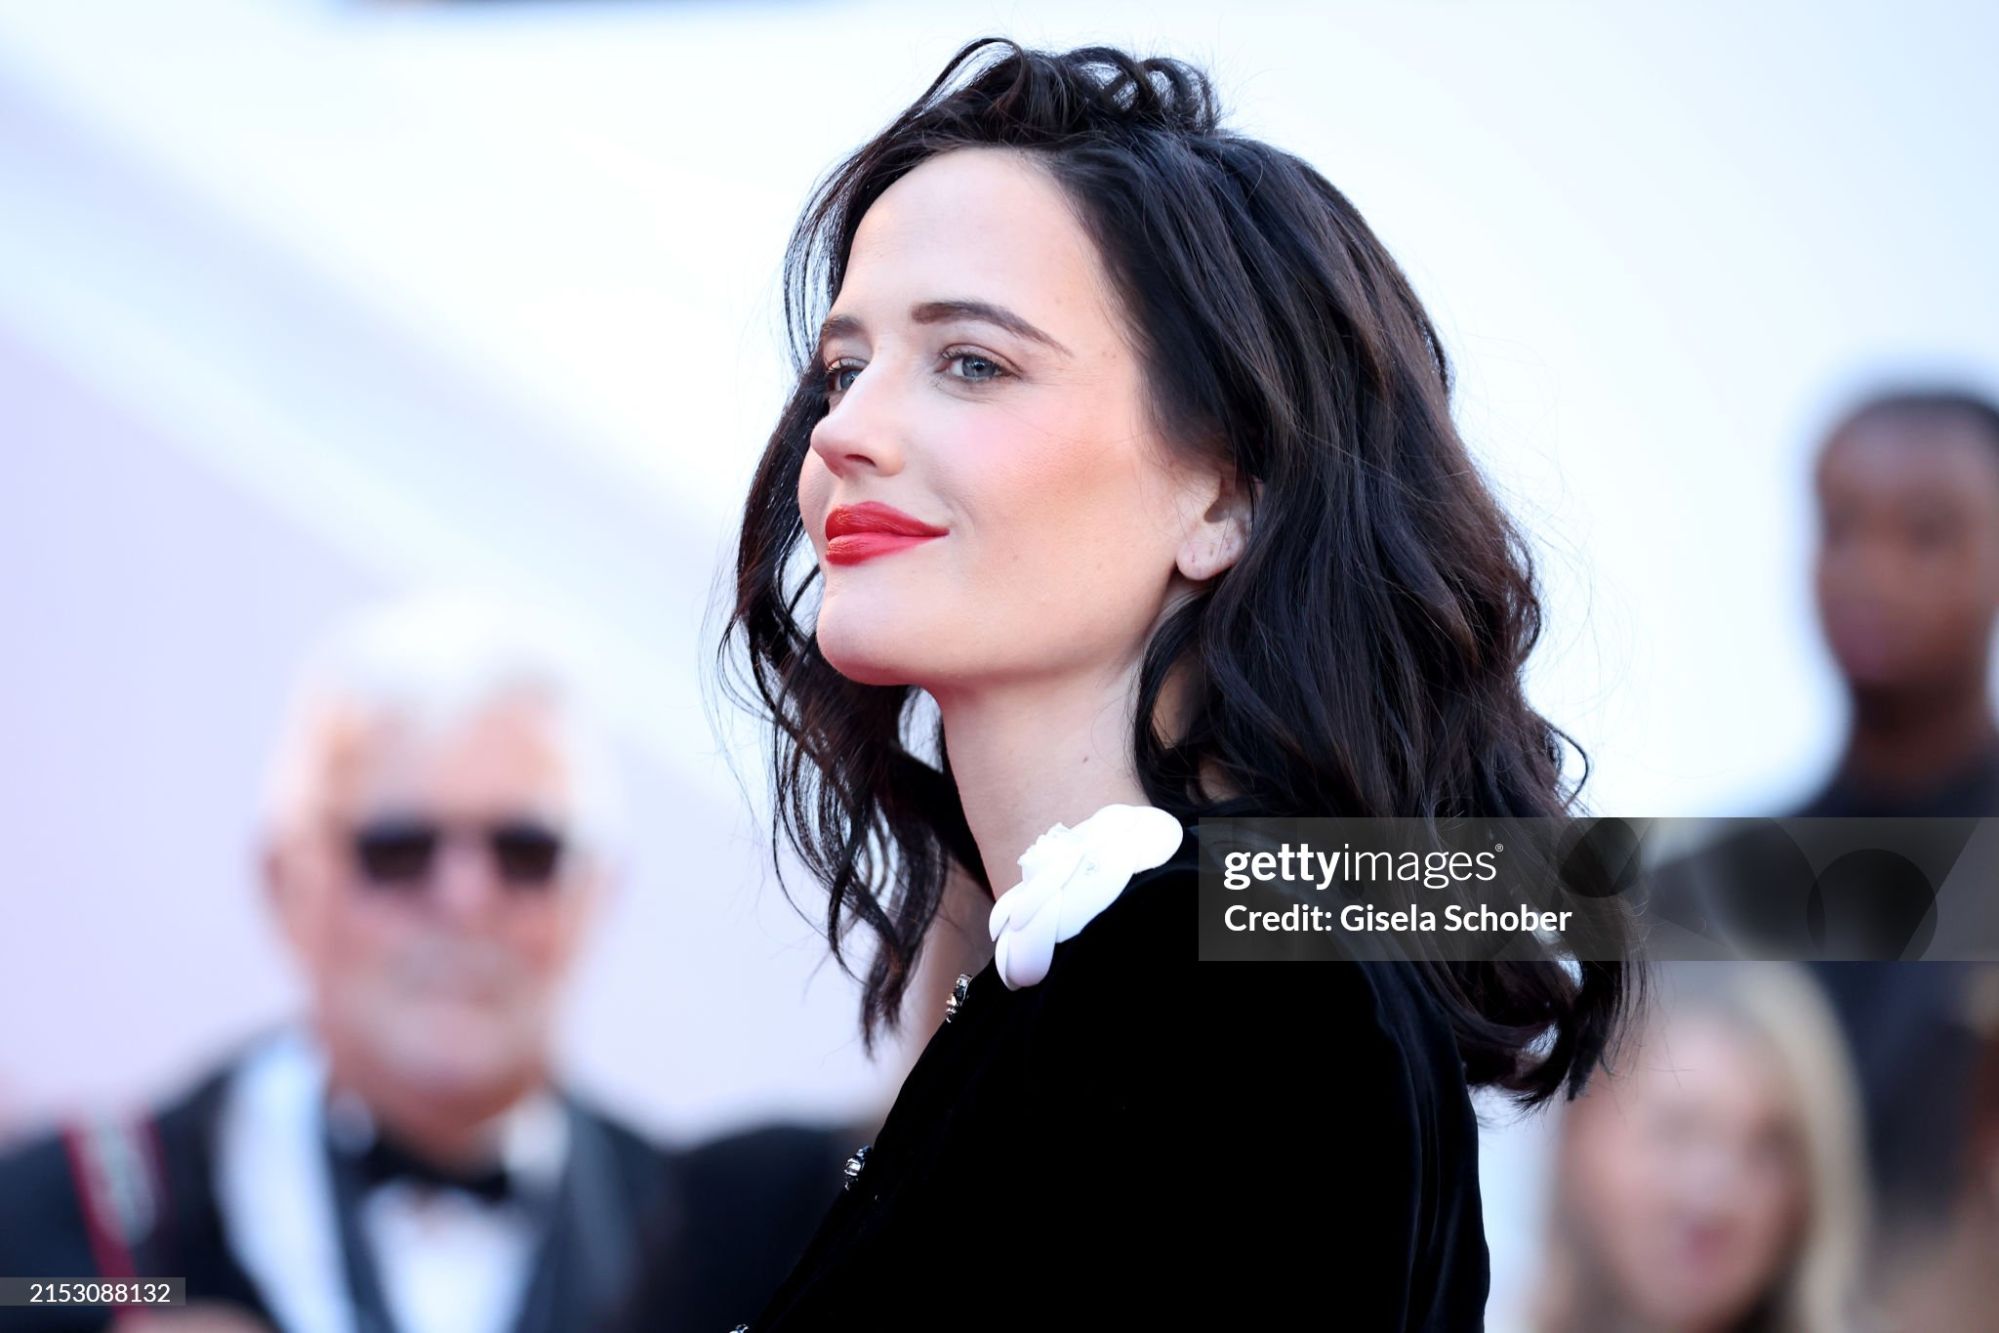 gettyimages-2153088132-2048x2048.jpg